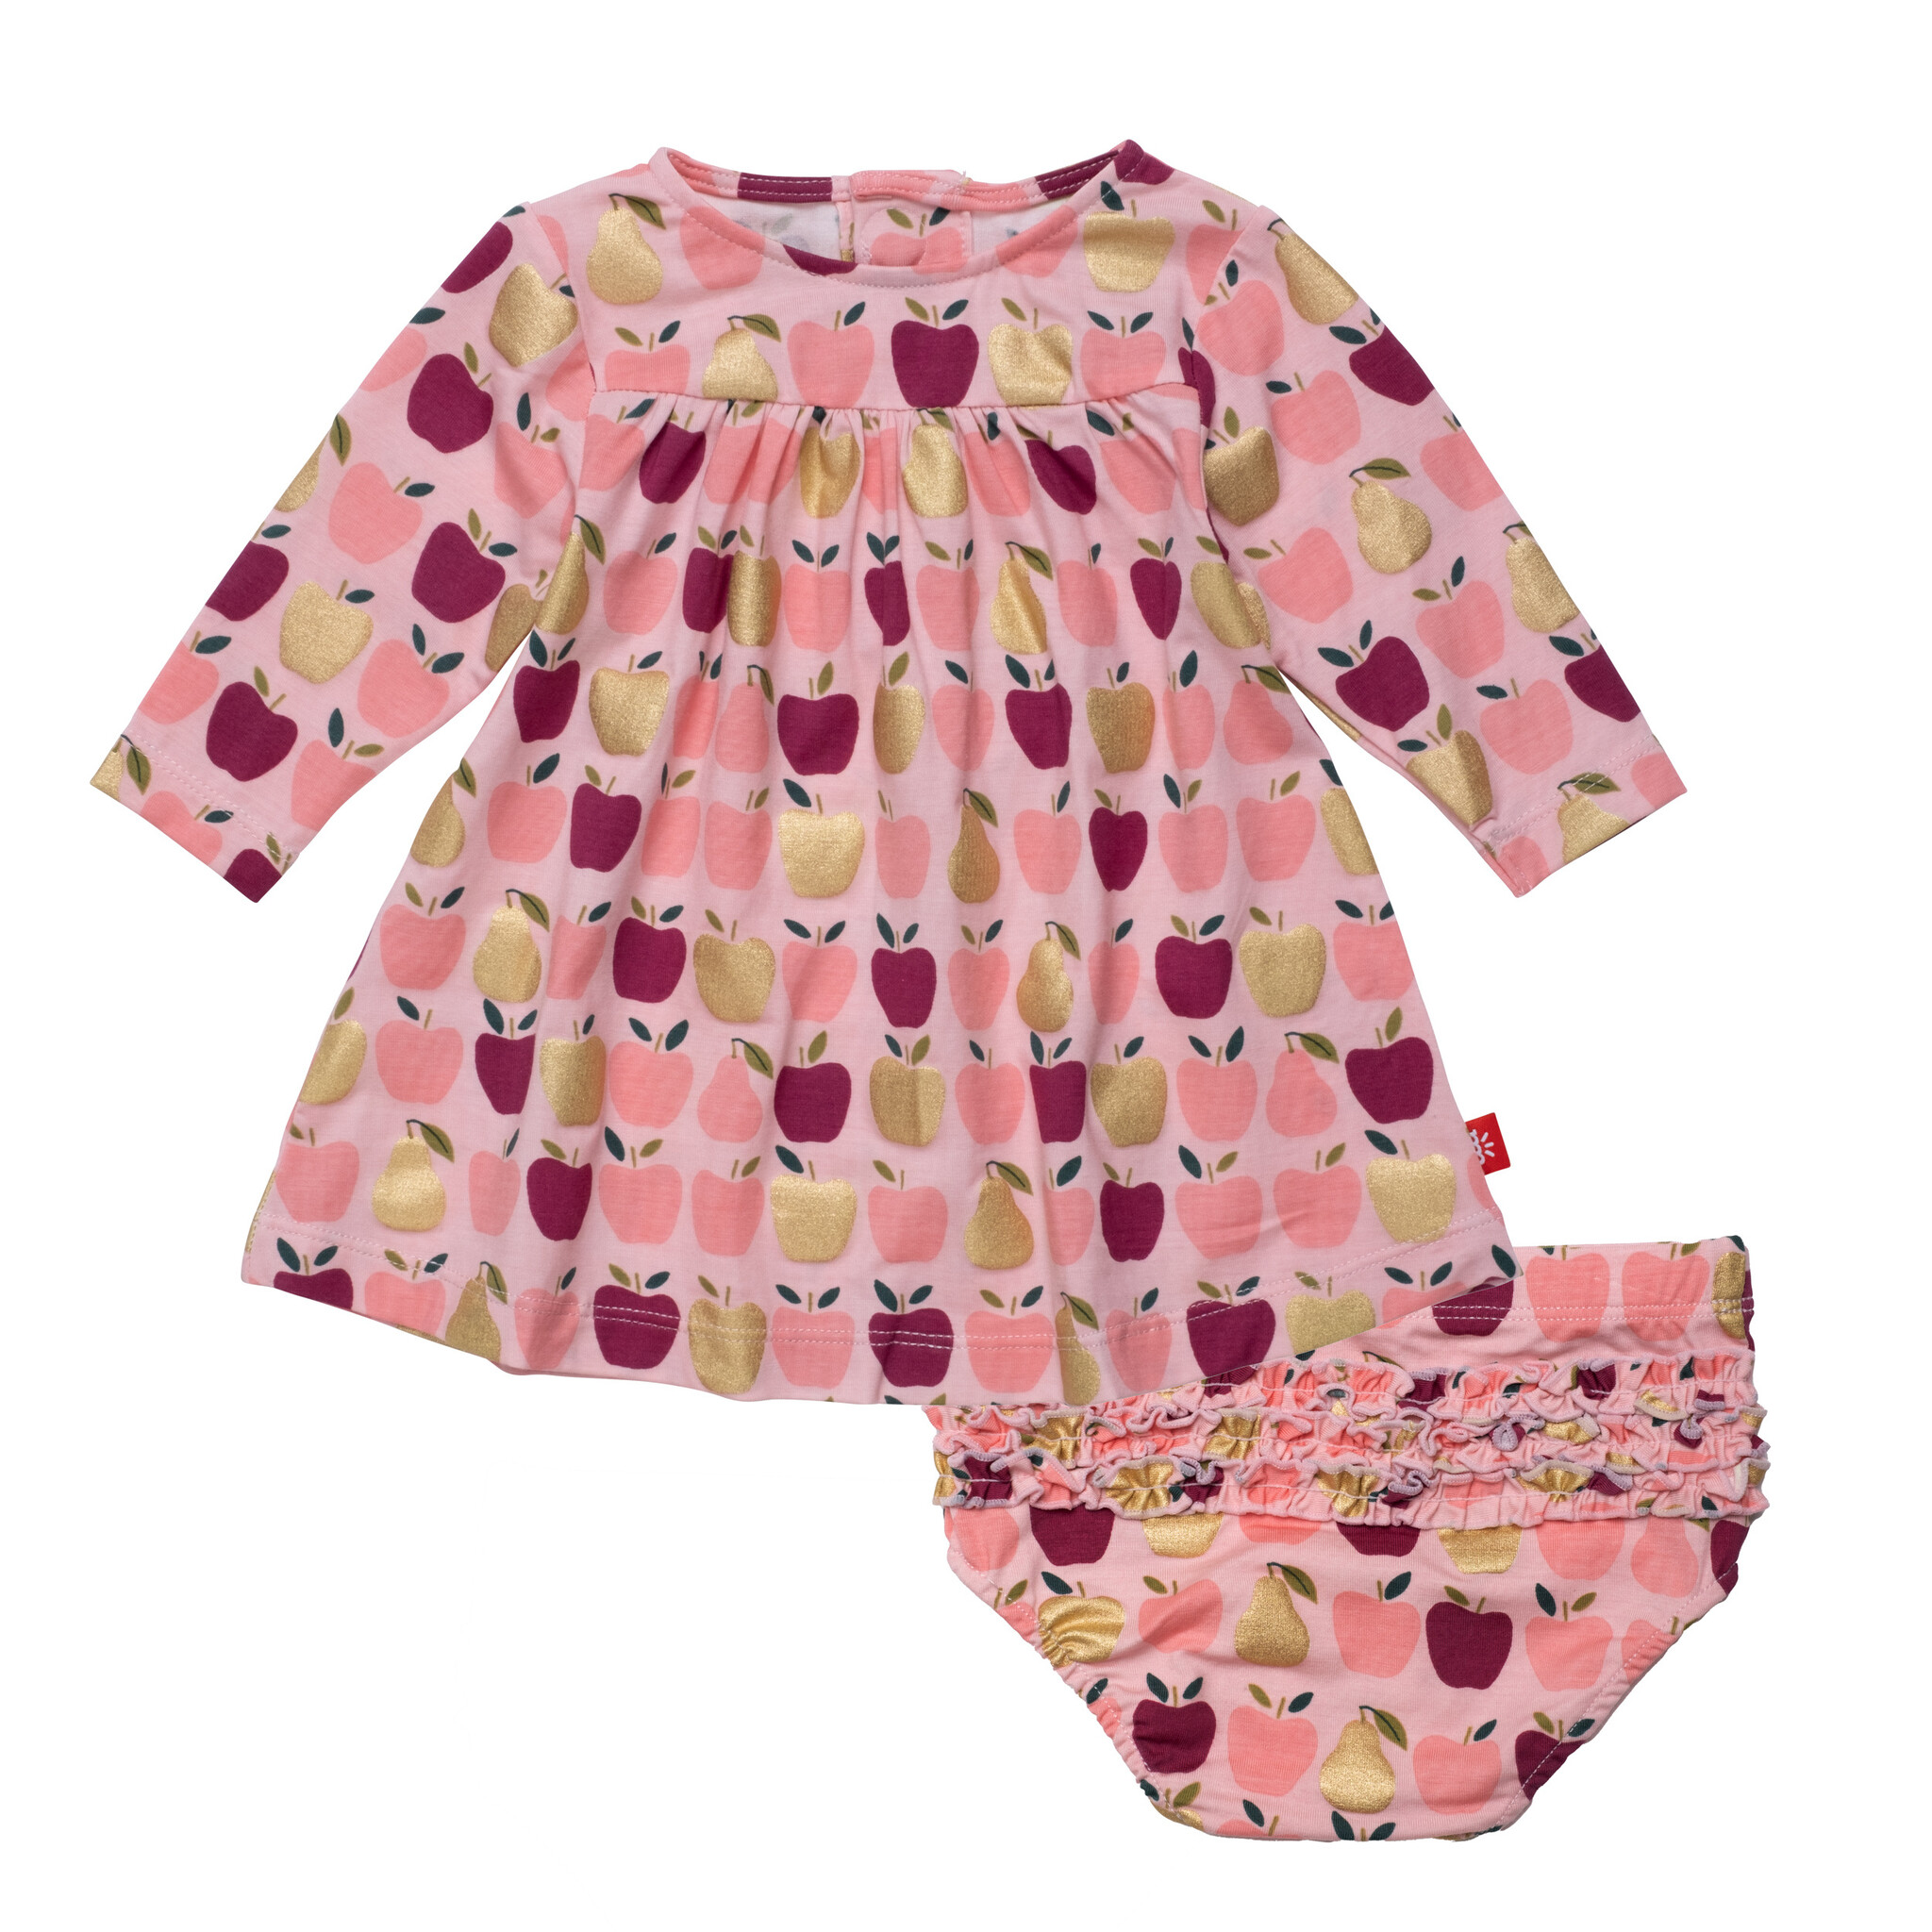 Magnificent Baby Appleton Infant Swing Dress/Ruffle Butt